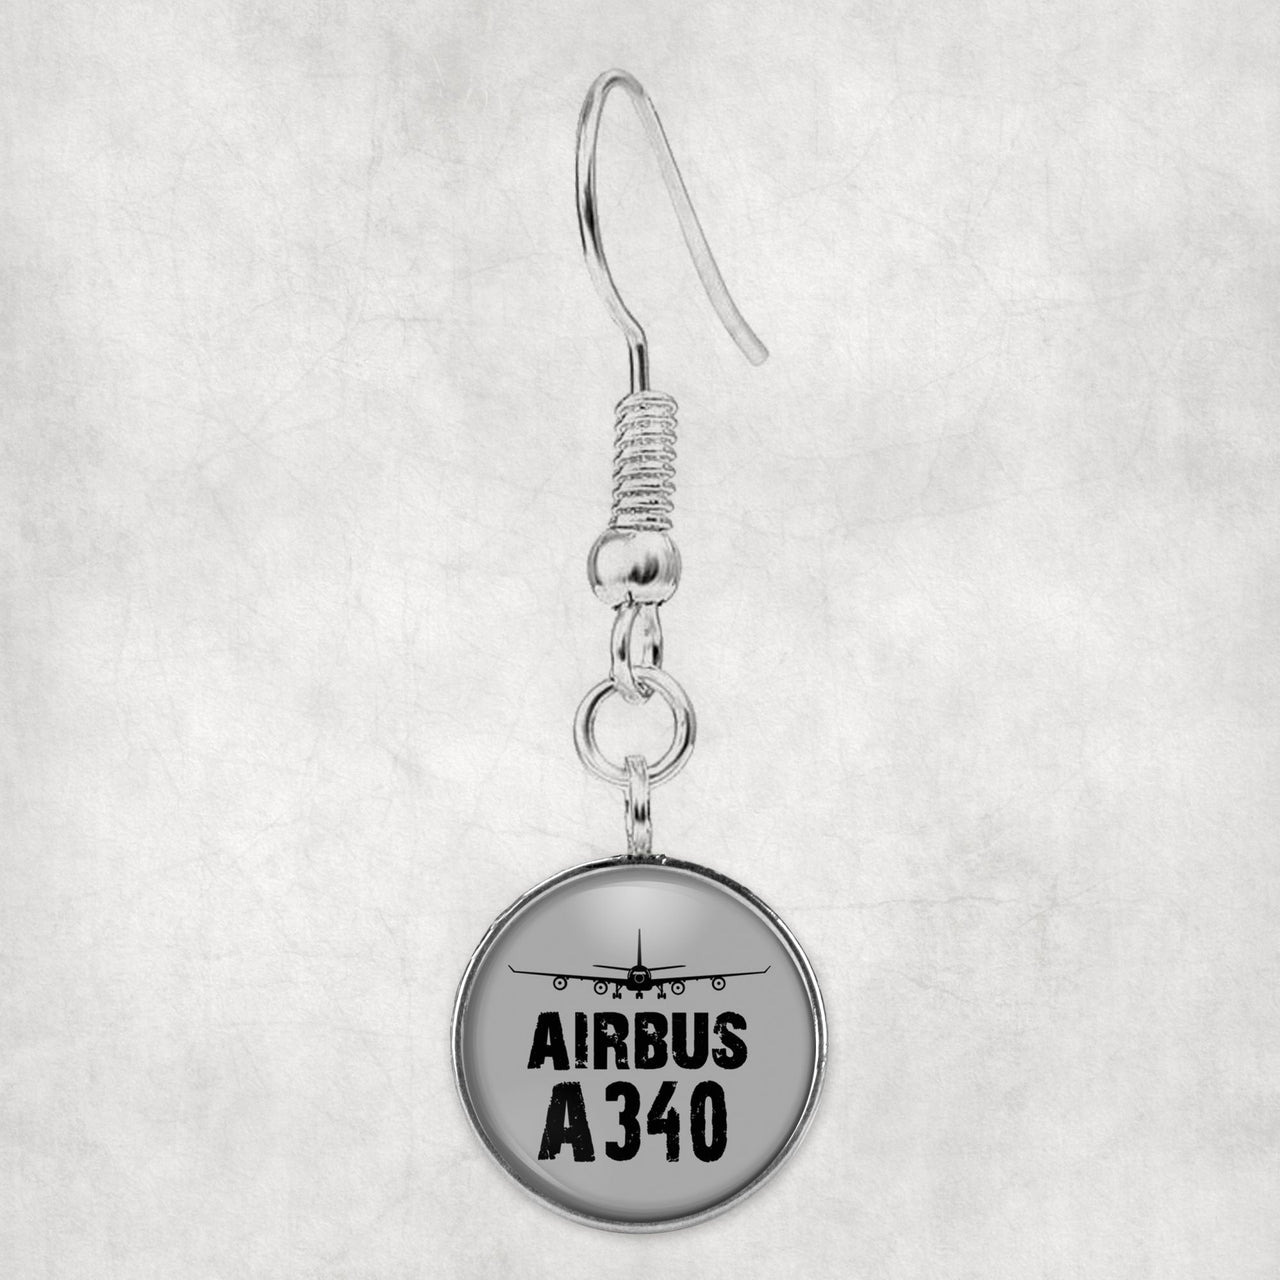 Airbus A340 & Plane Designed Earrings